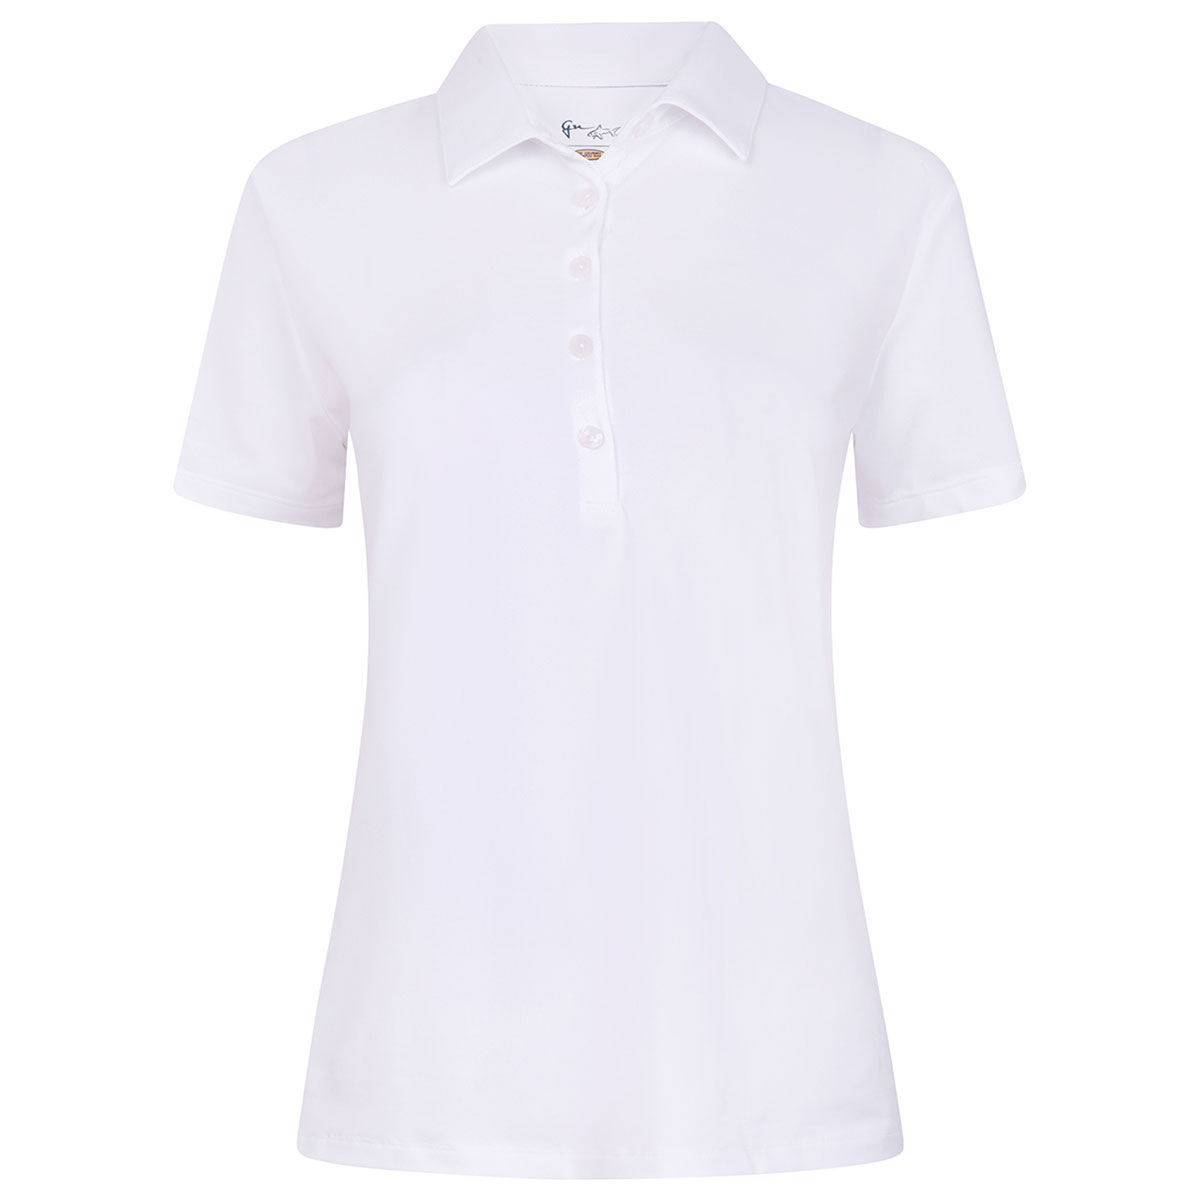 Greg Norman White Embroidered Freedom Pique Golf Polo Shirt, Womens | American Golf, Size: XS